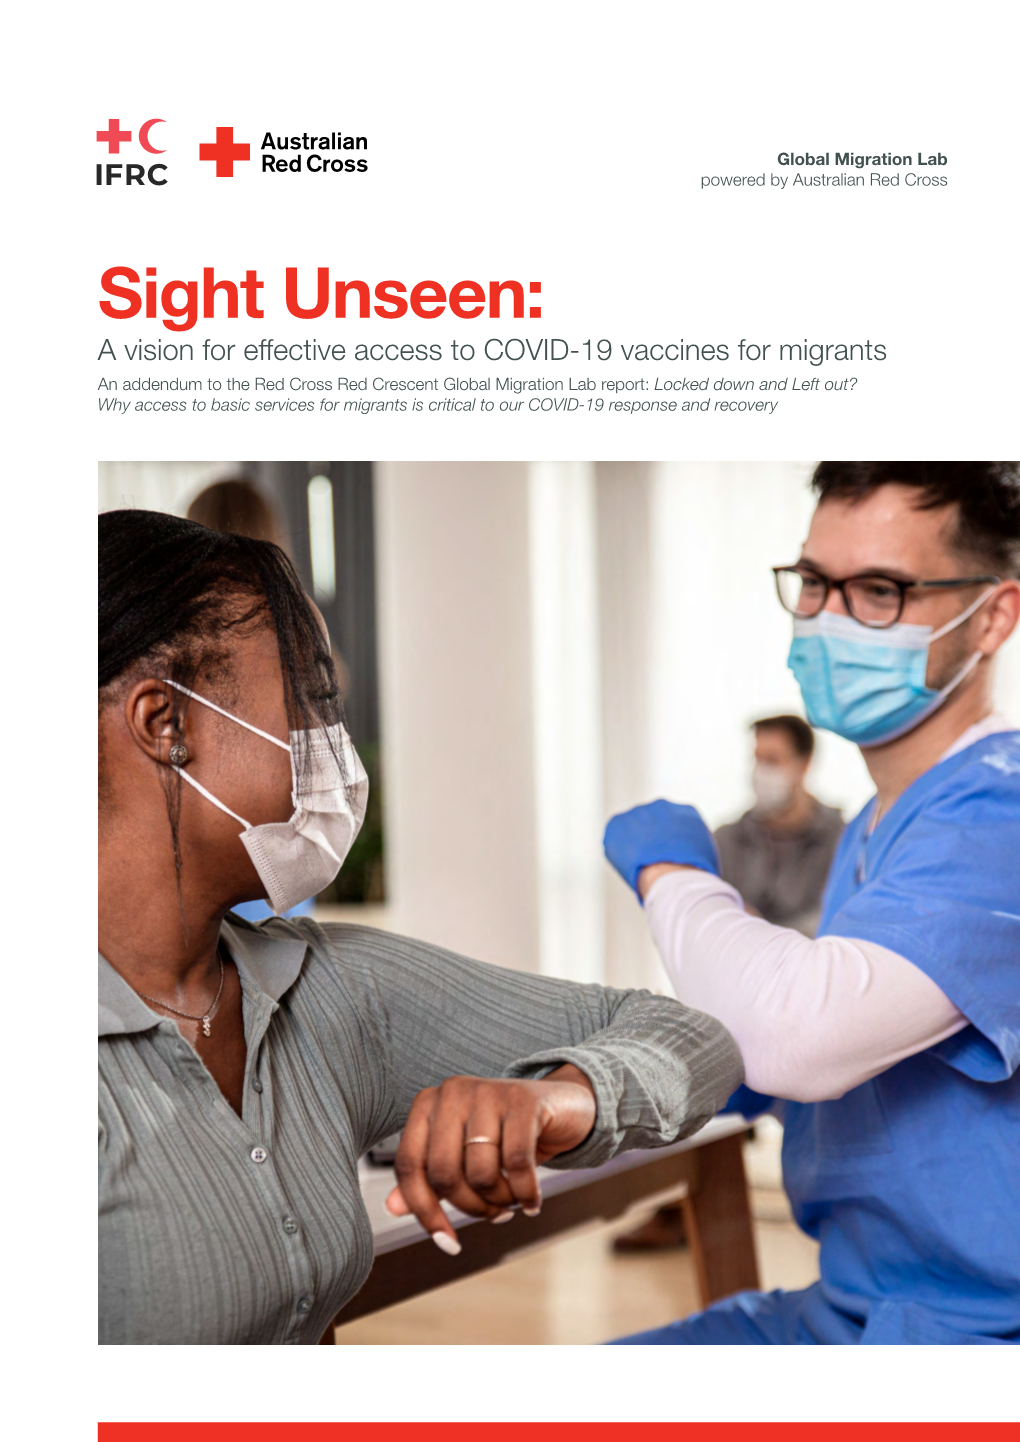 Sight Unseen: a Vision for Effective Access to COVID-19 Vaccines For